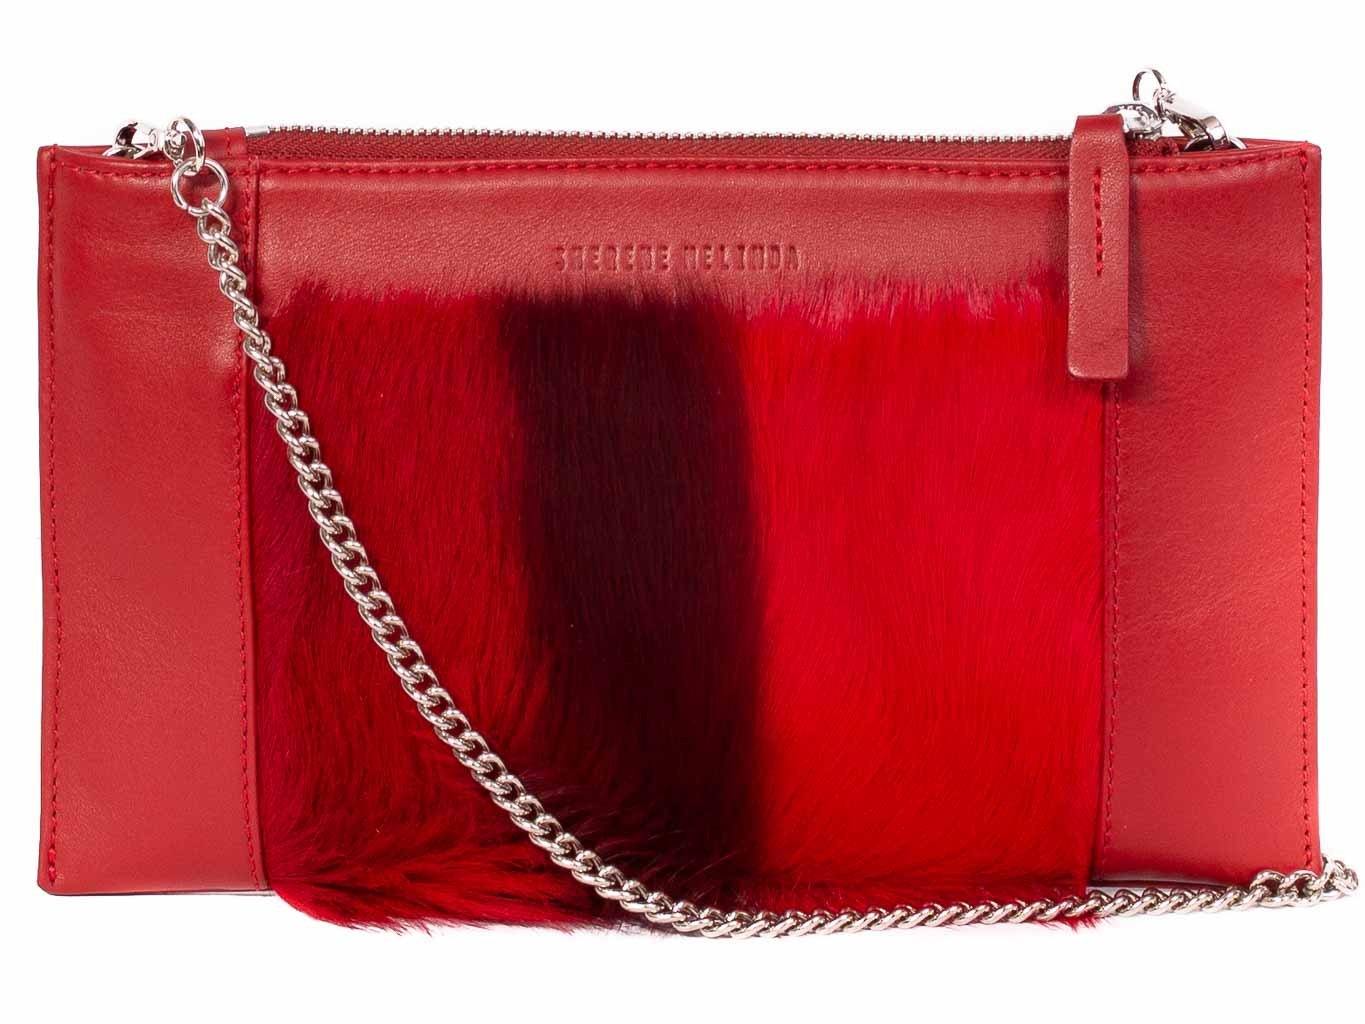 Clutch Springbok Handbag in Crimson Red with a stripe feature by Sherene Melinda front strap